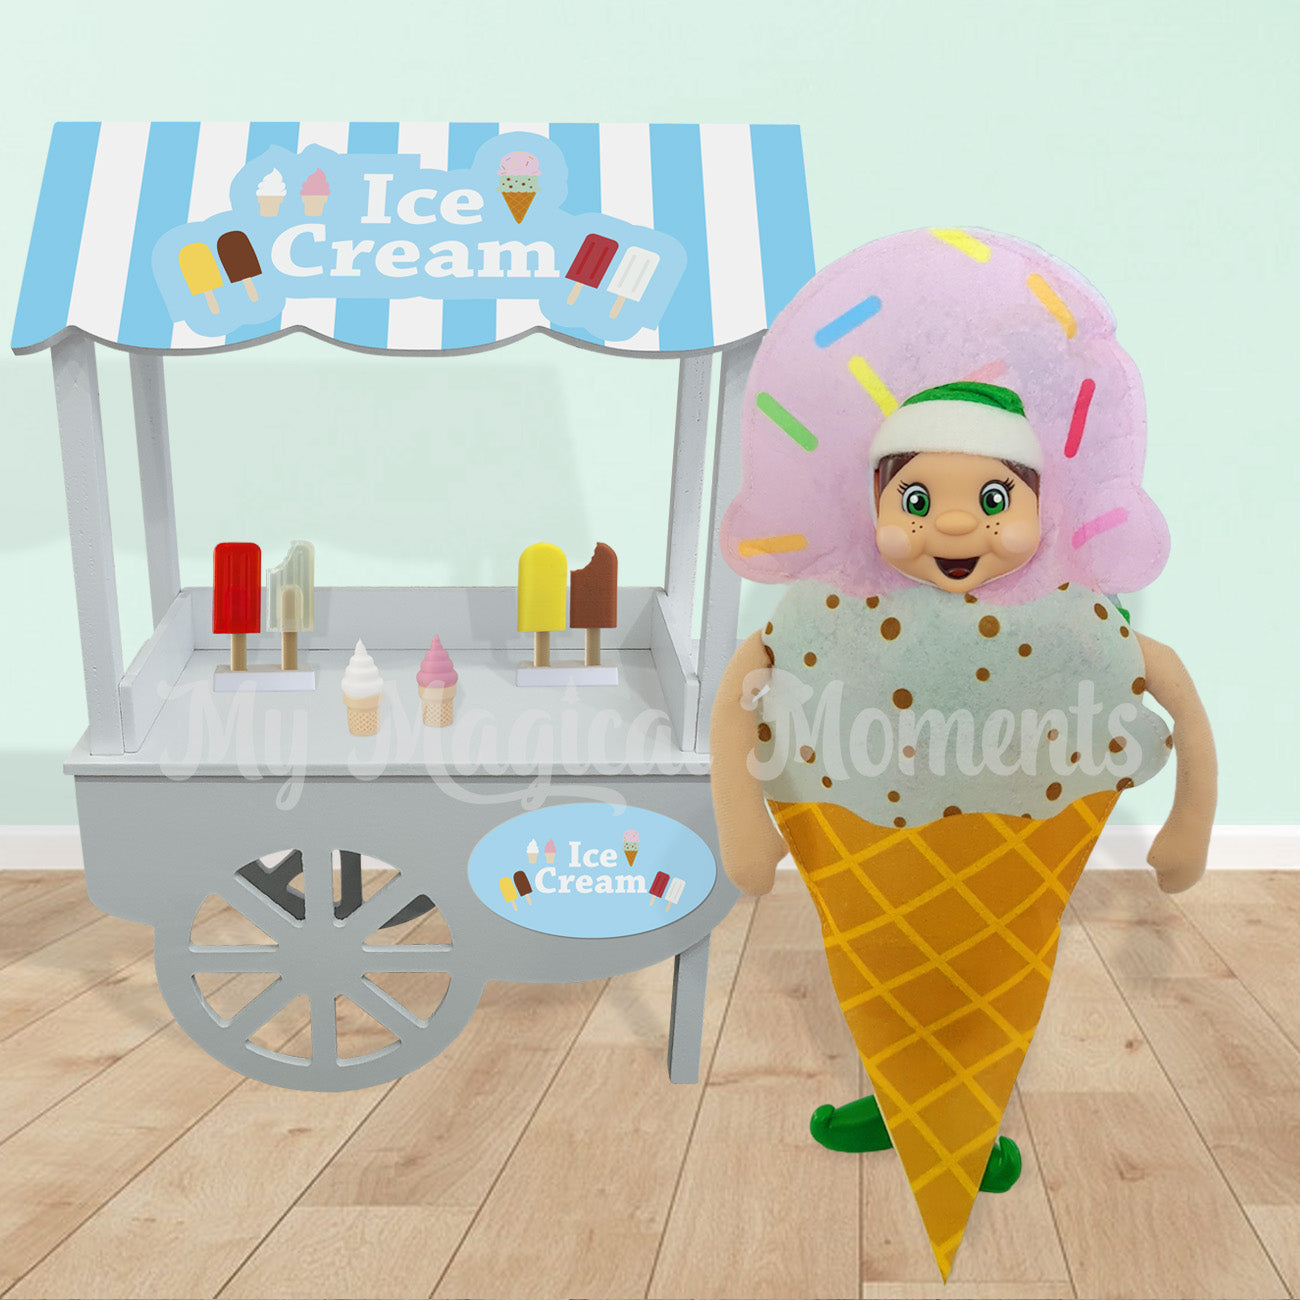 Elf dressed as an ice cream selling paddle pops to elf toddlers